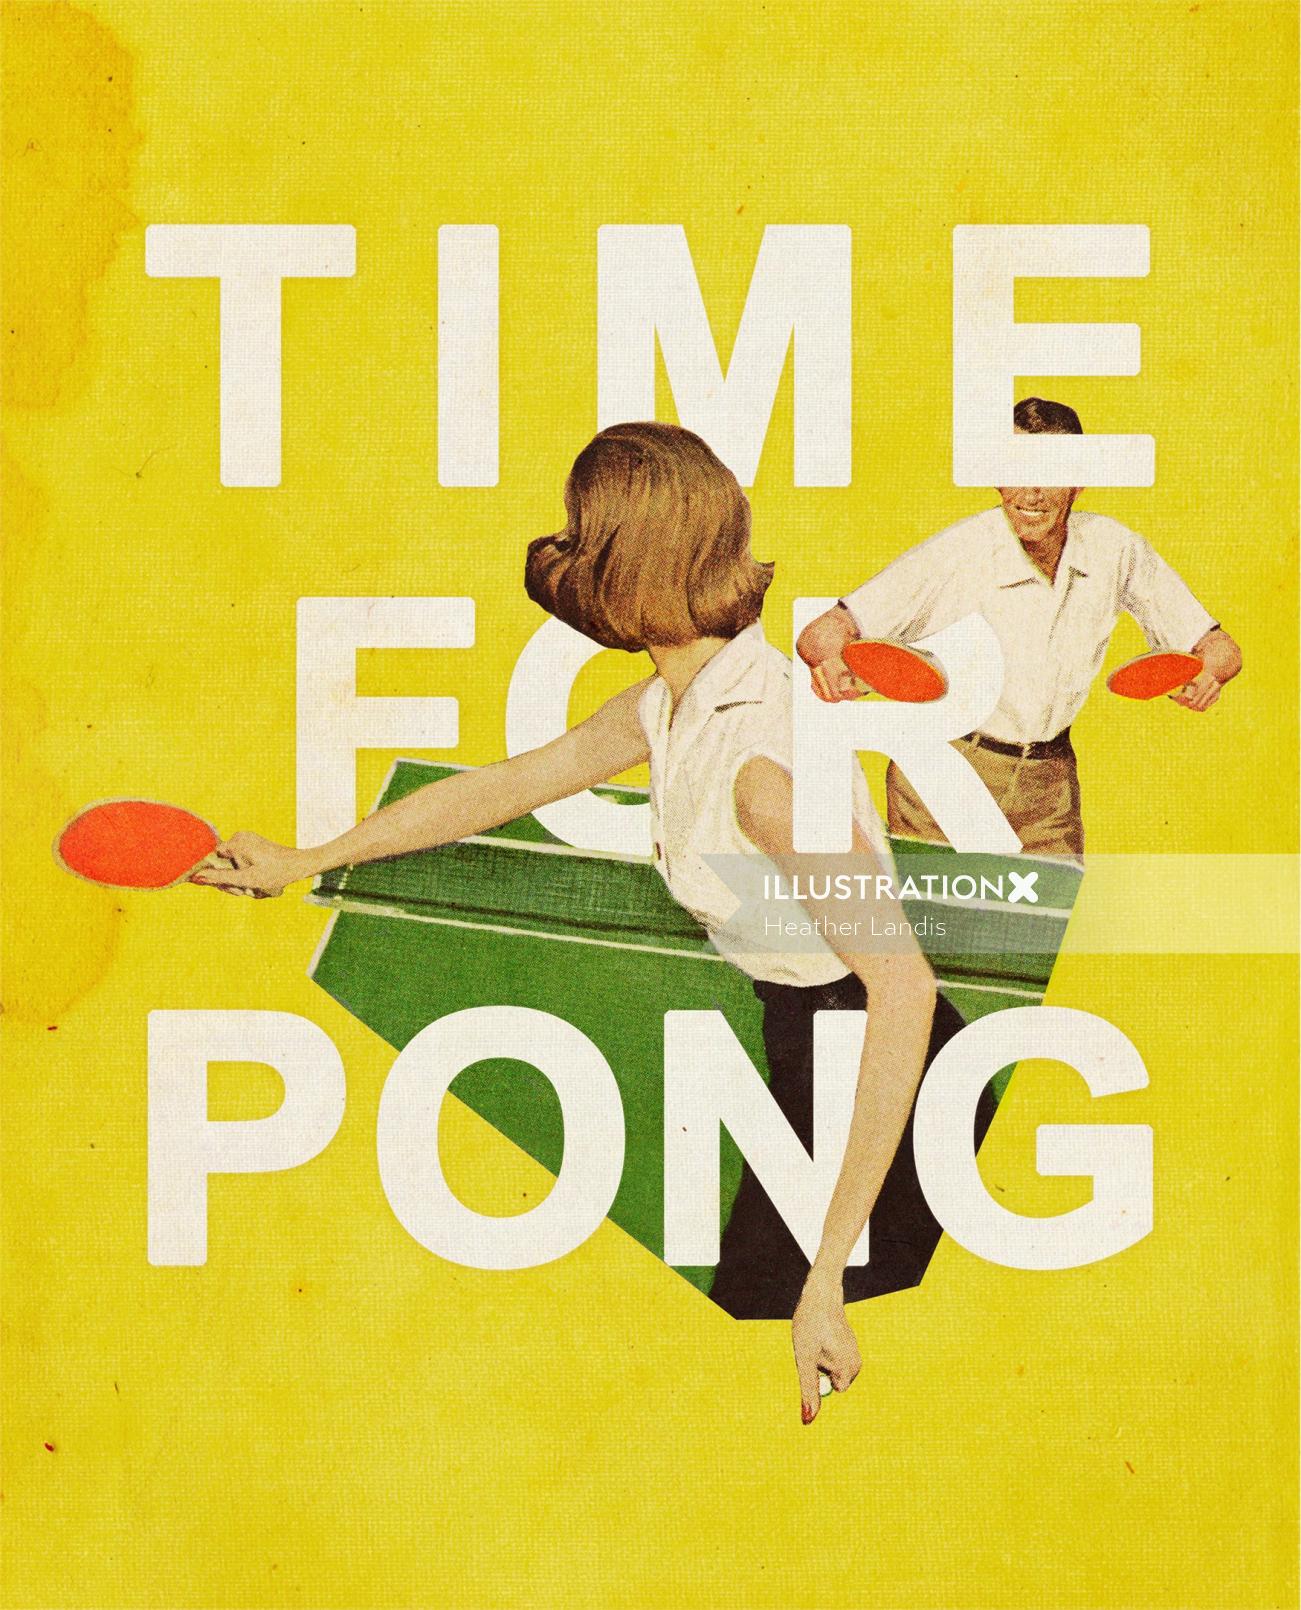 Couple playing ping pong illustration by Heather Landis